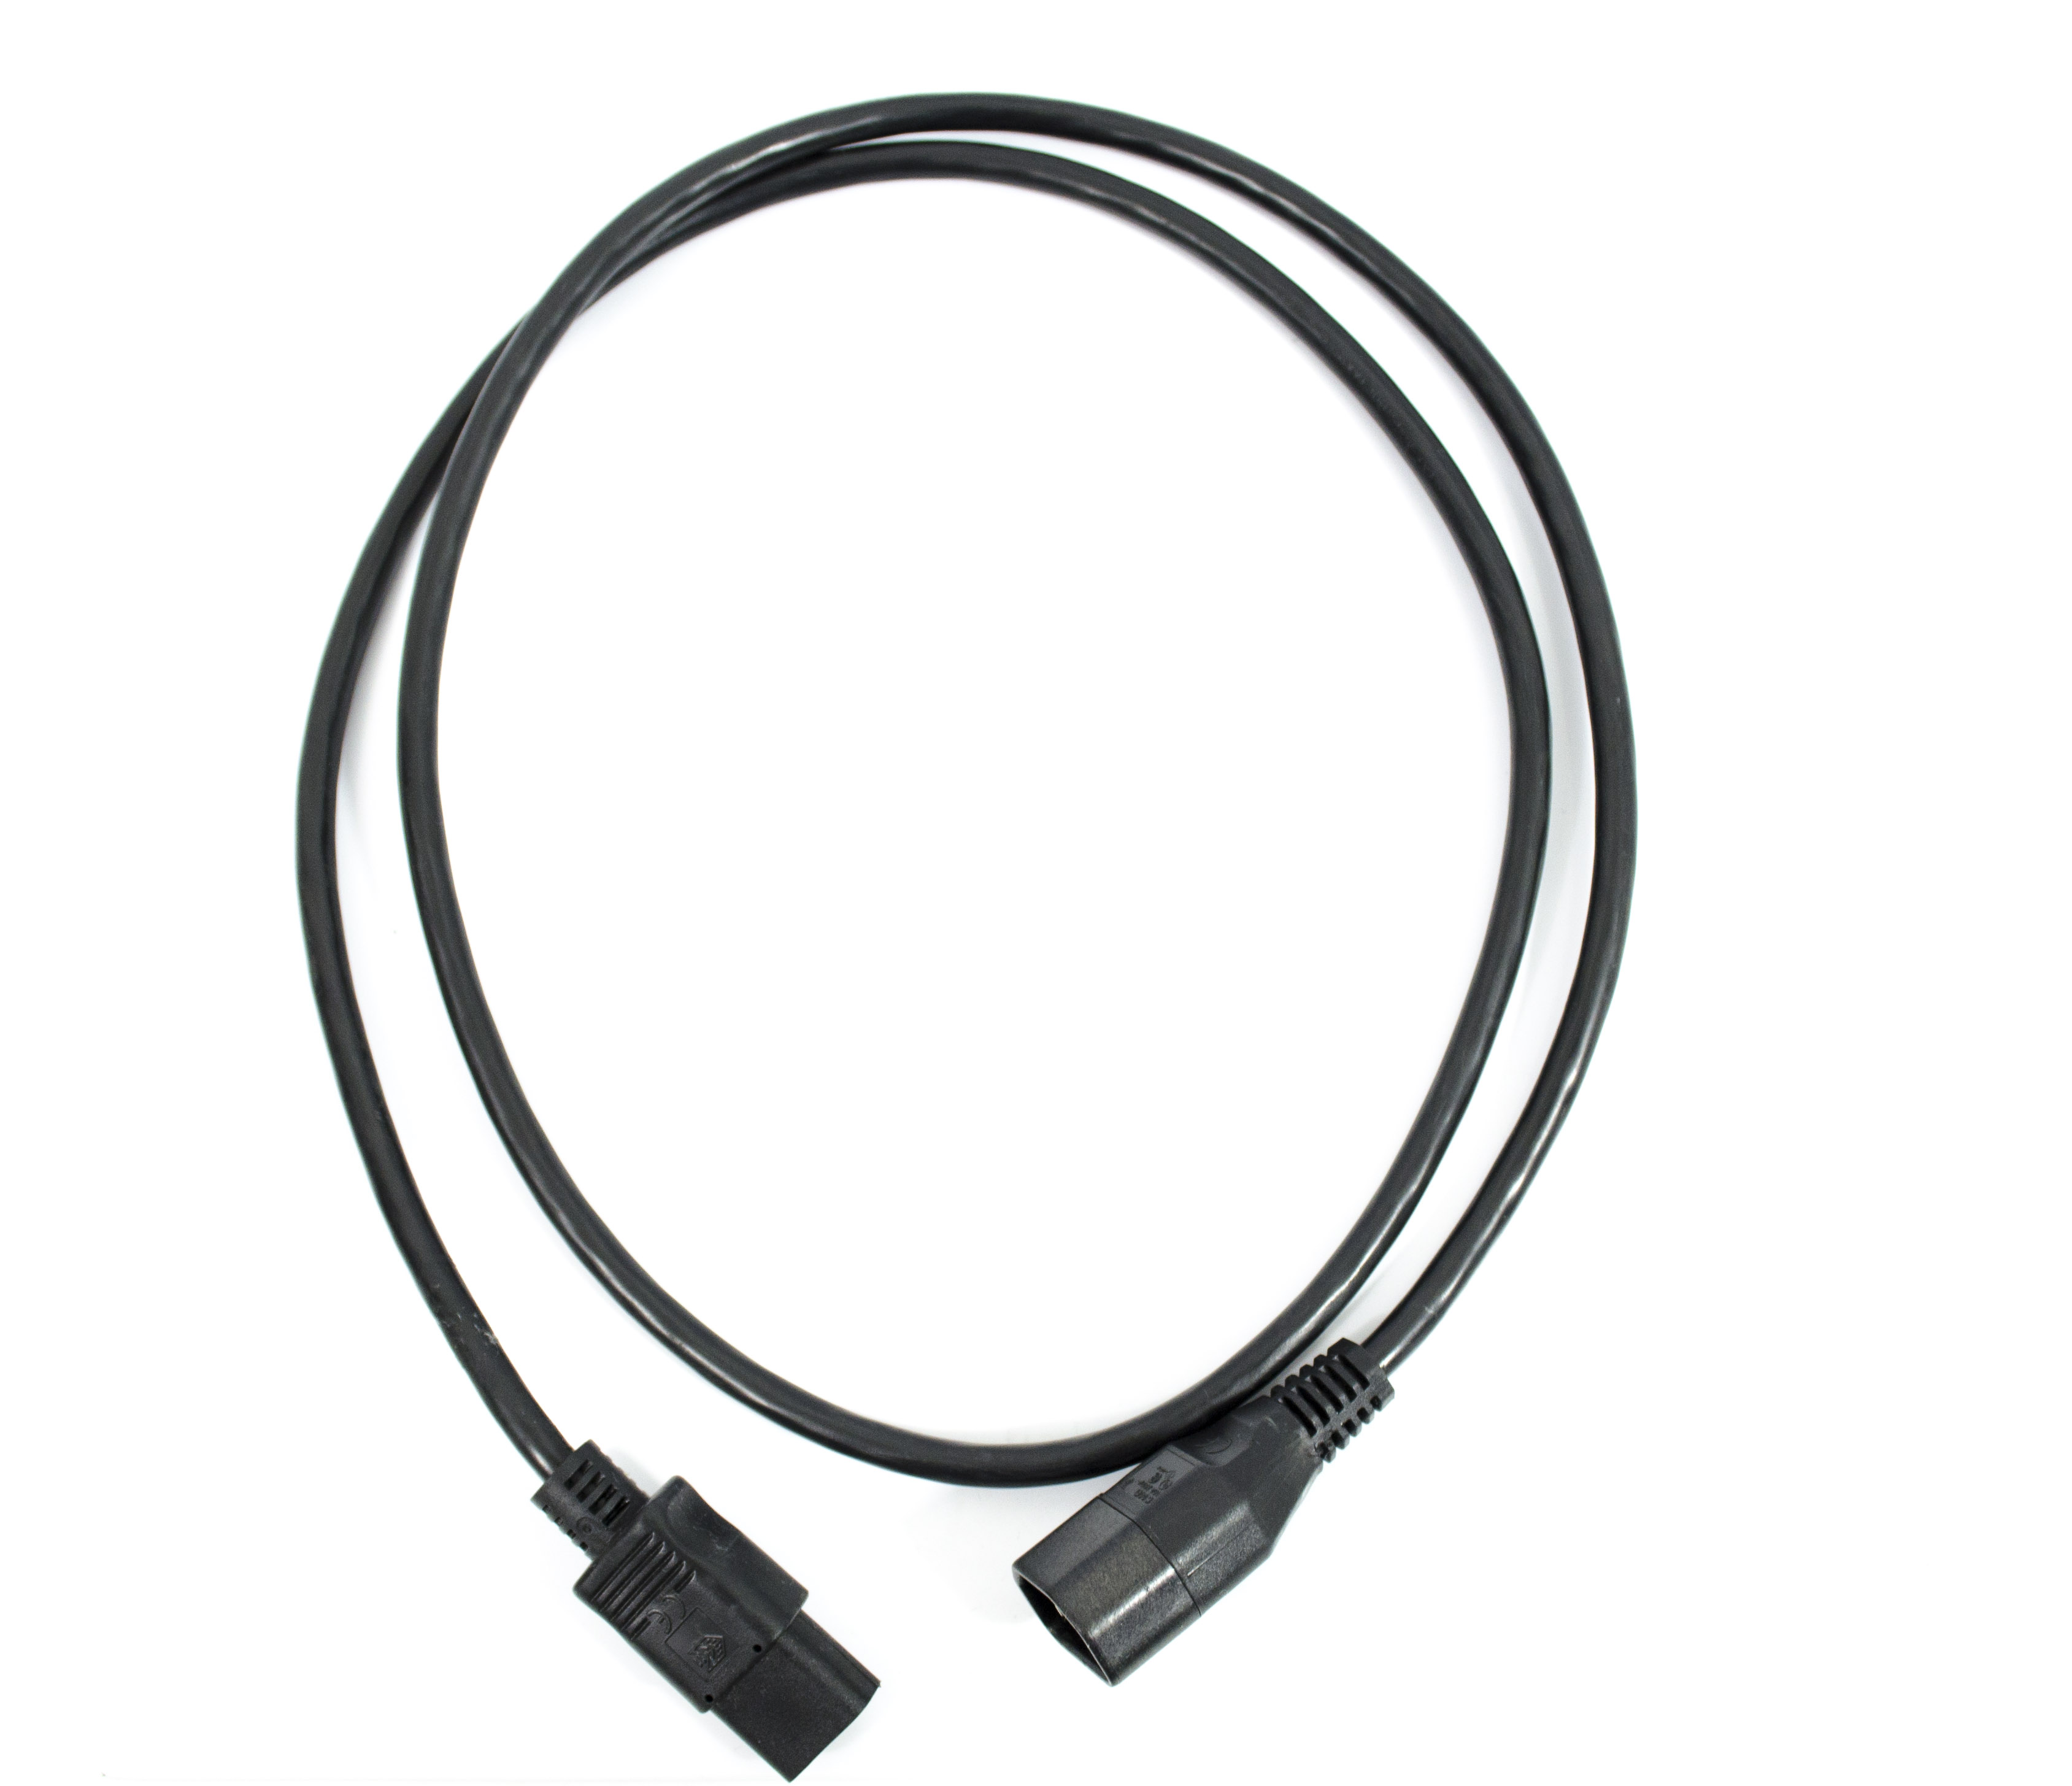 Universal Jumper Cord - C14G To C13, 10A, 3ft